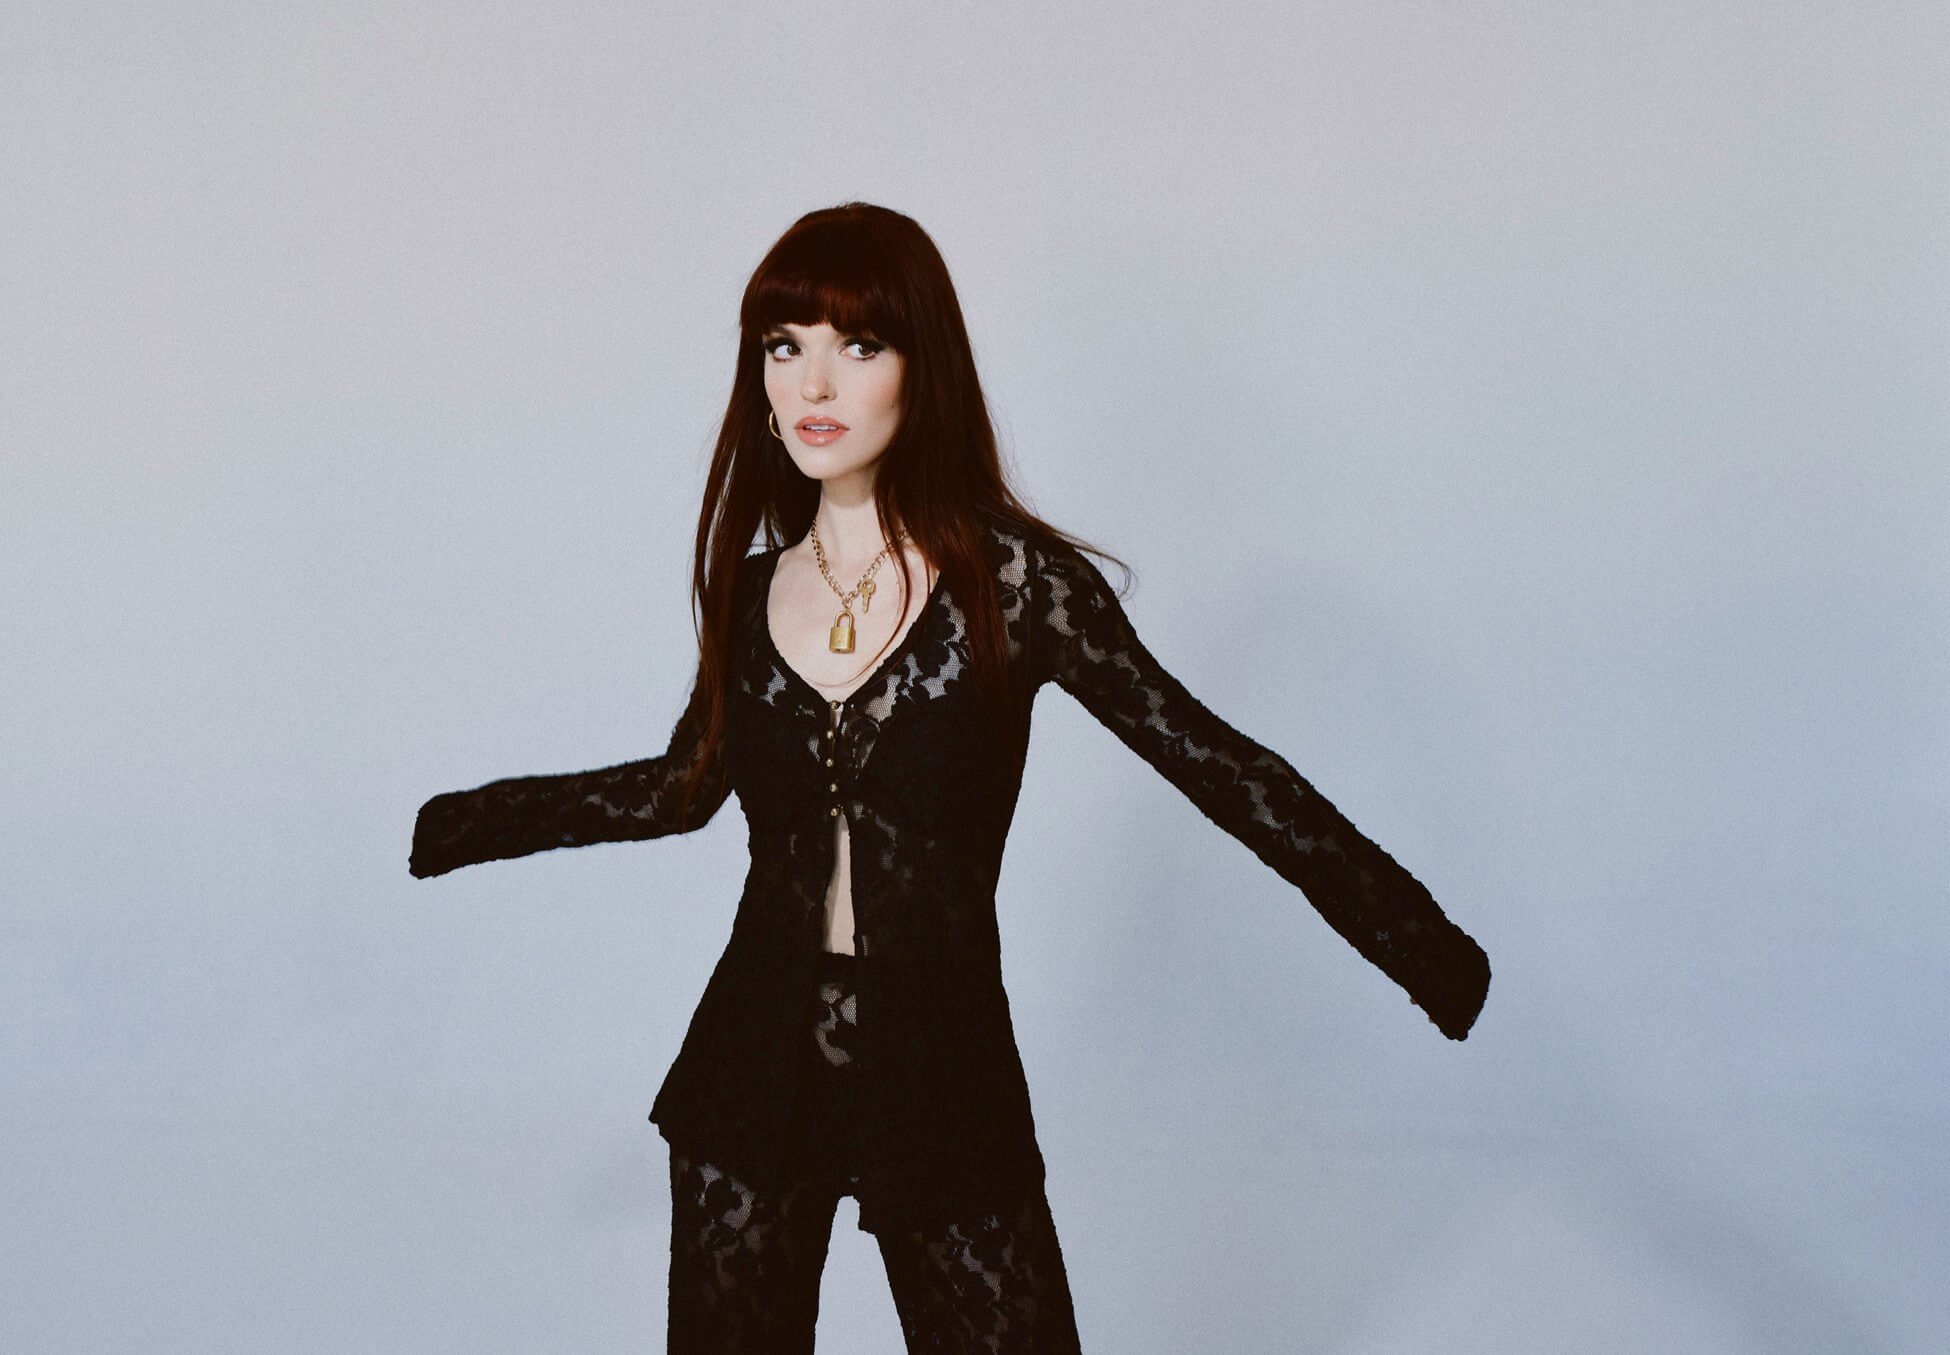 Lily Kinade stands in front of a gray backdrop wearing a black lace outfit